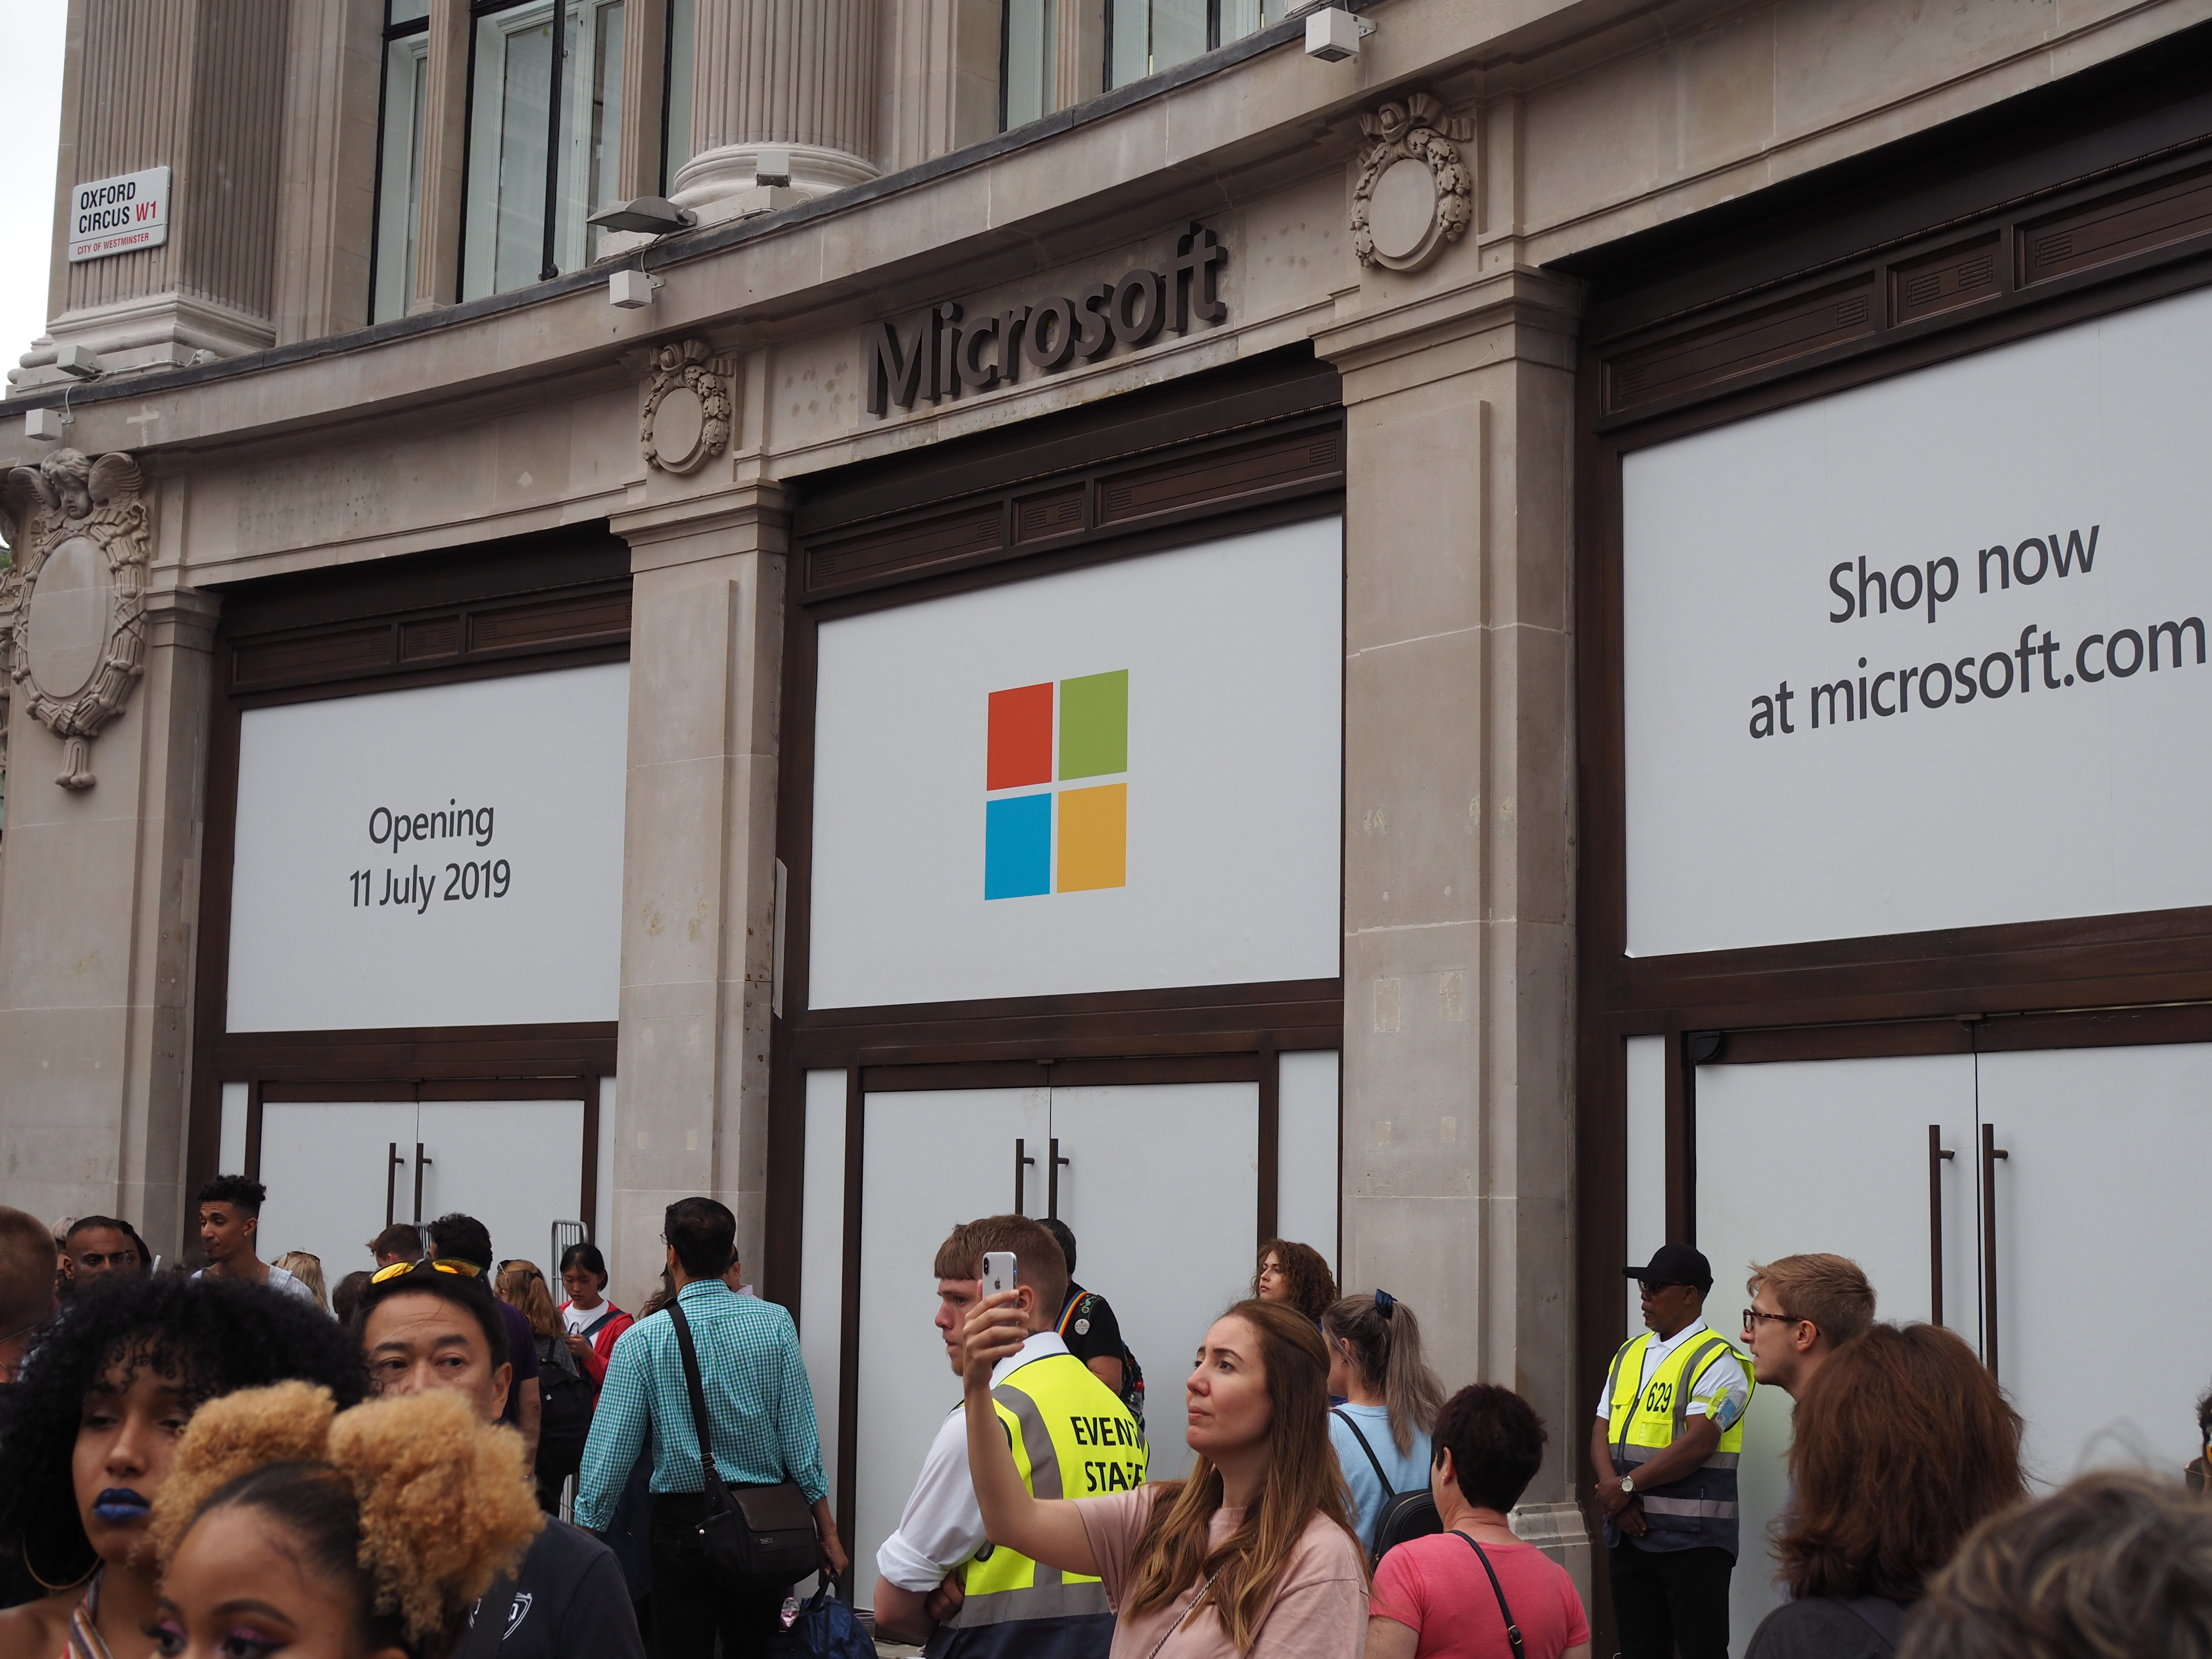 The Microsoft Flagship Store in London